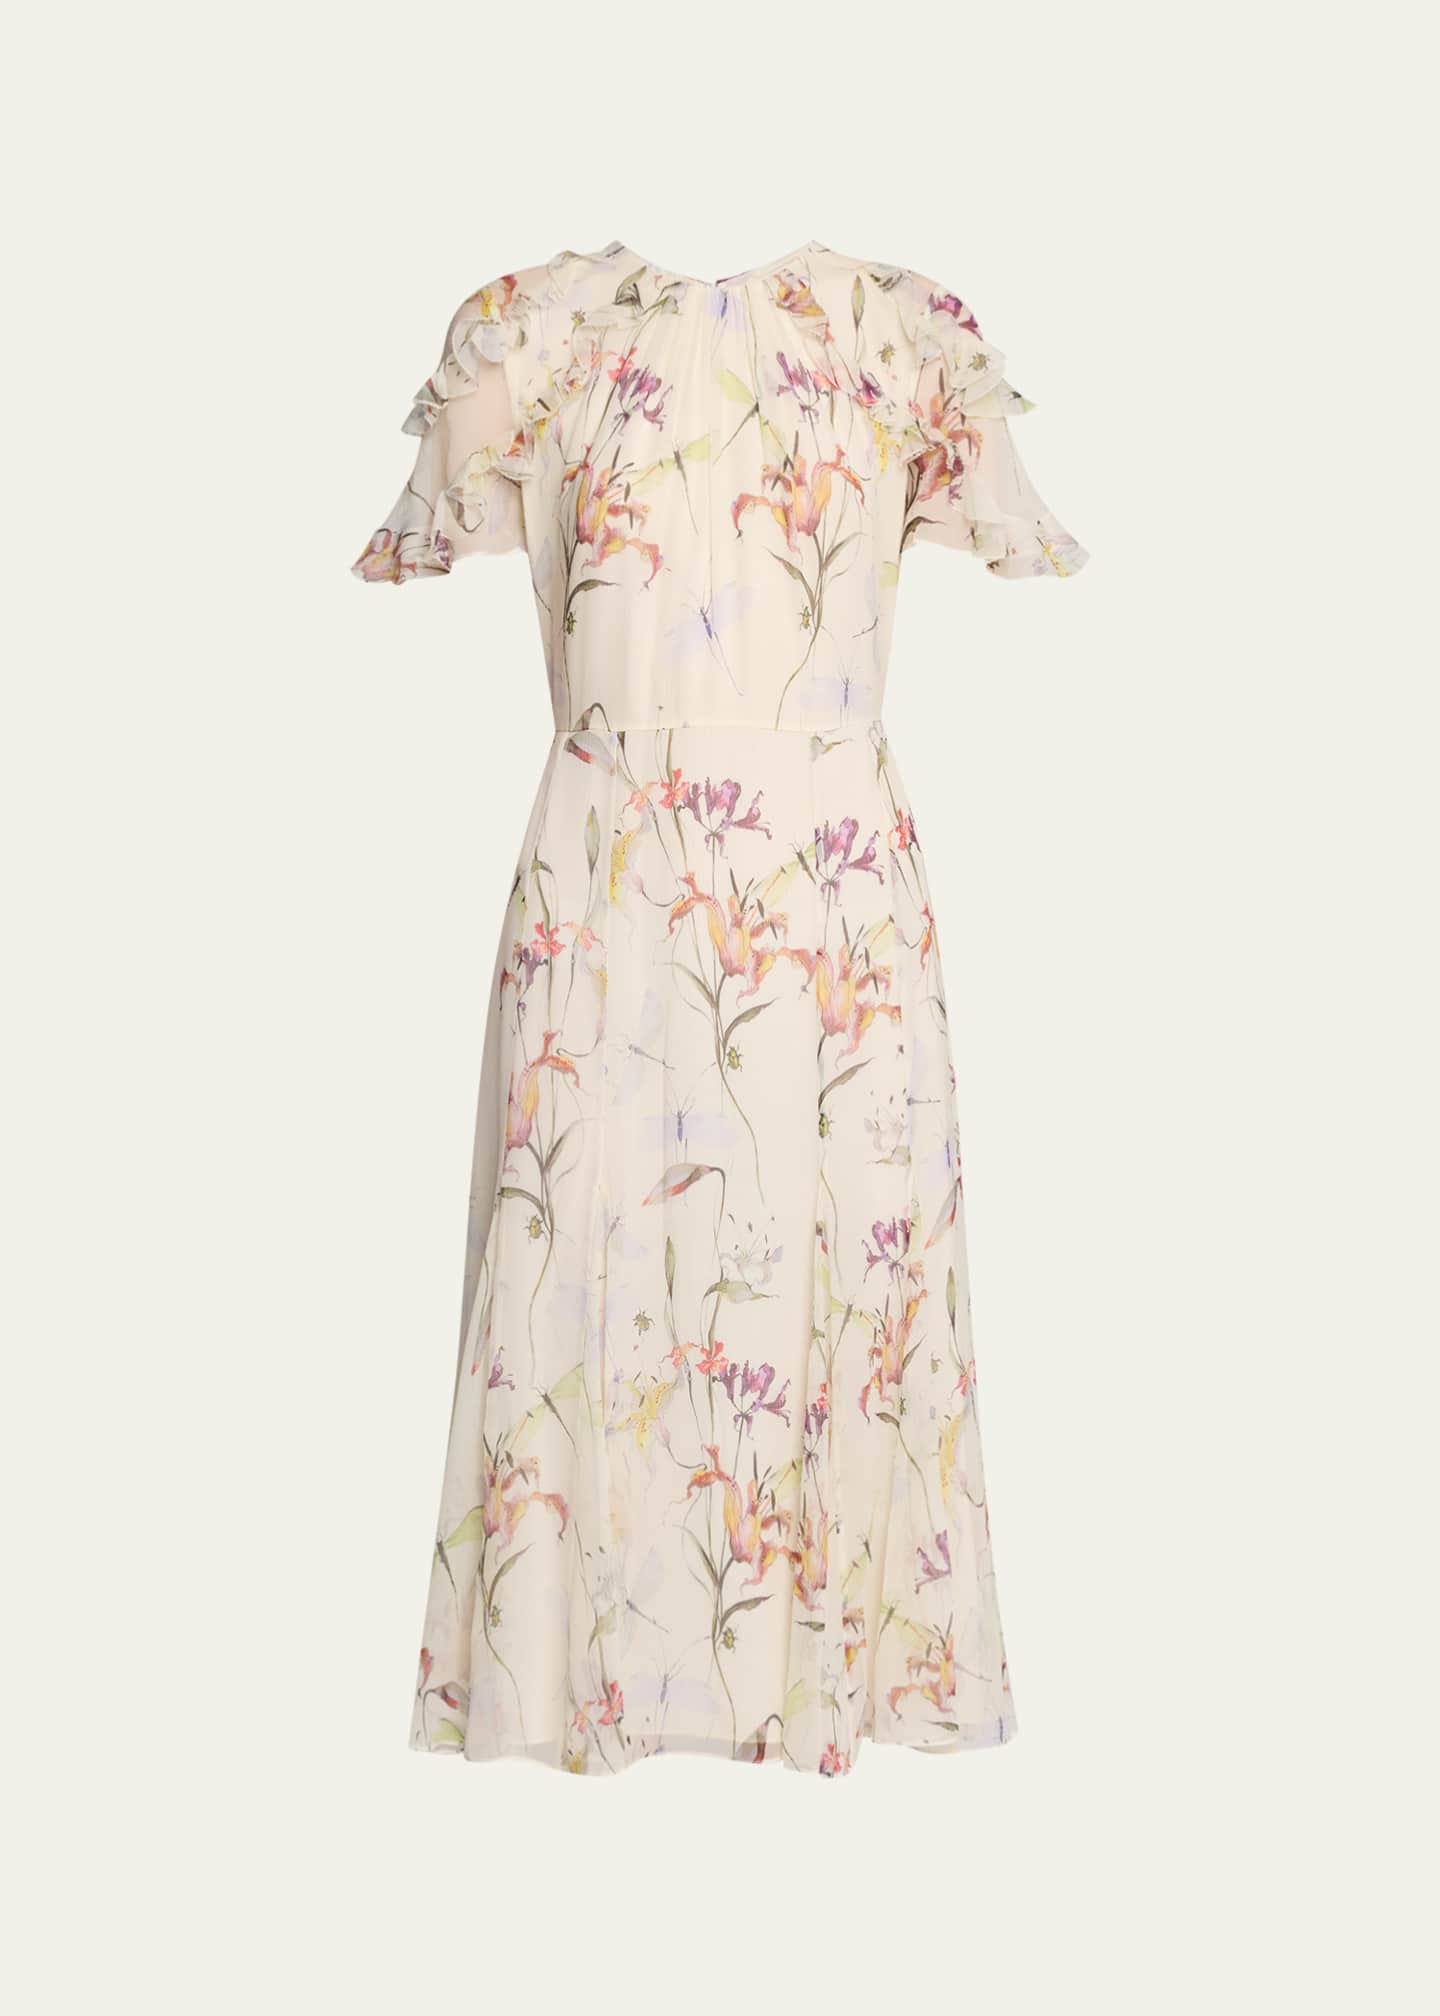 Jason Wu Collection Floral Flutter-Sleeve Chiffon Day Dress Image 1 of 5